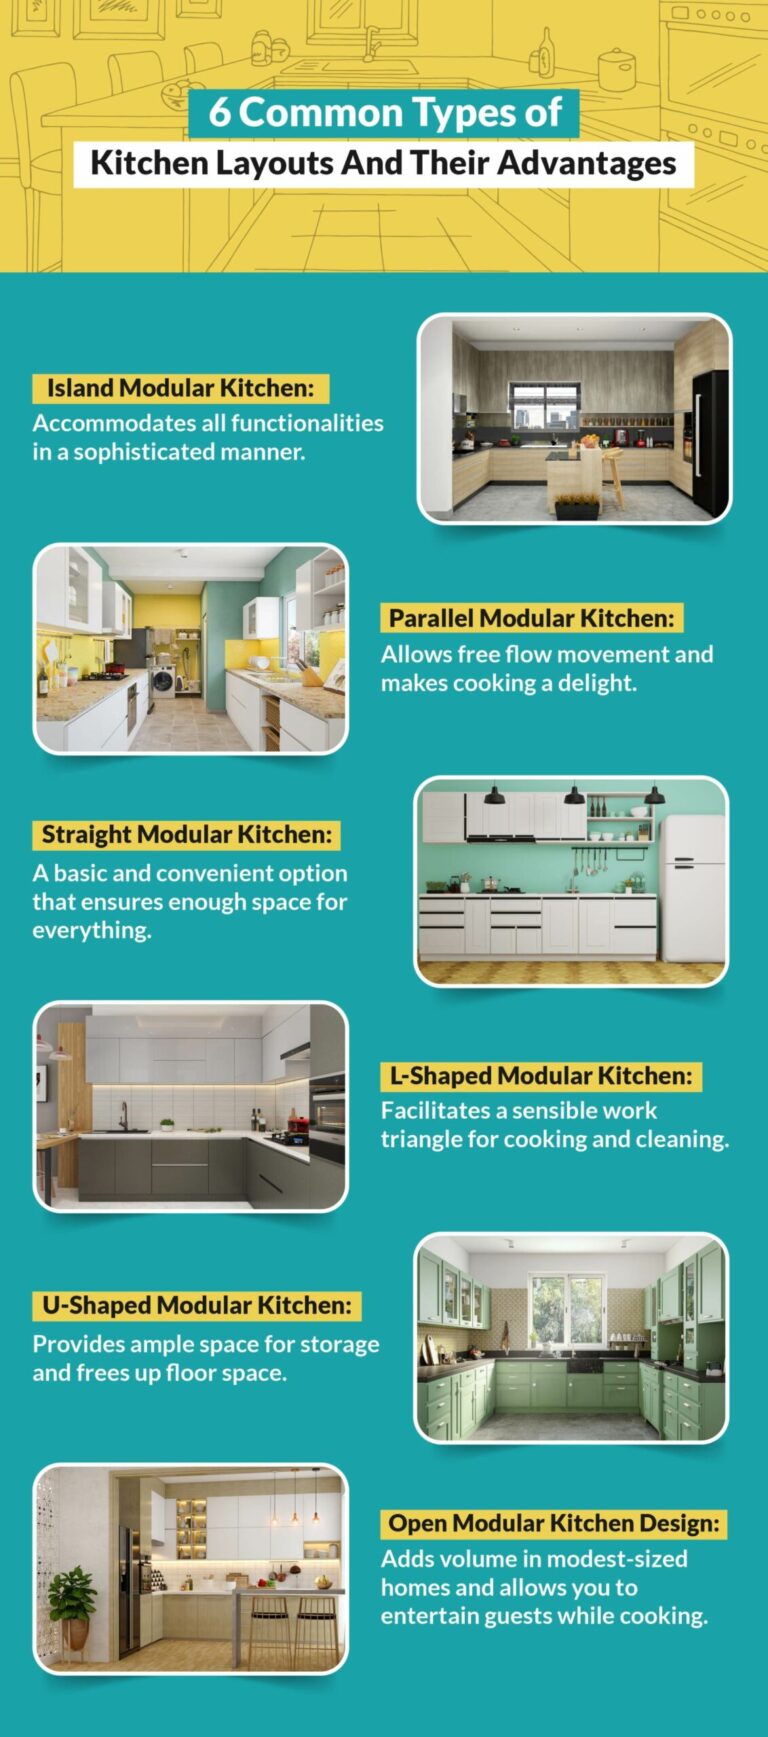 What Are The Six Basic Kitchen Styles?